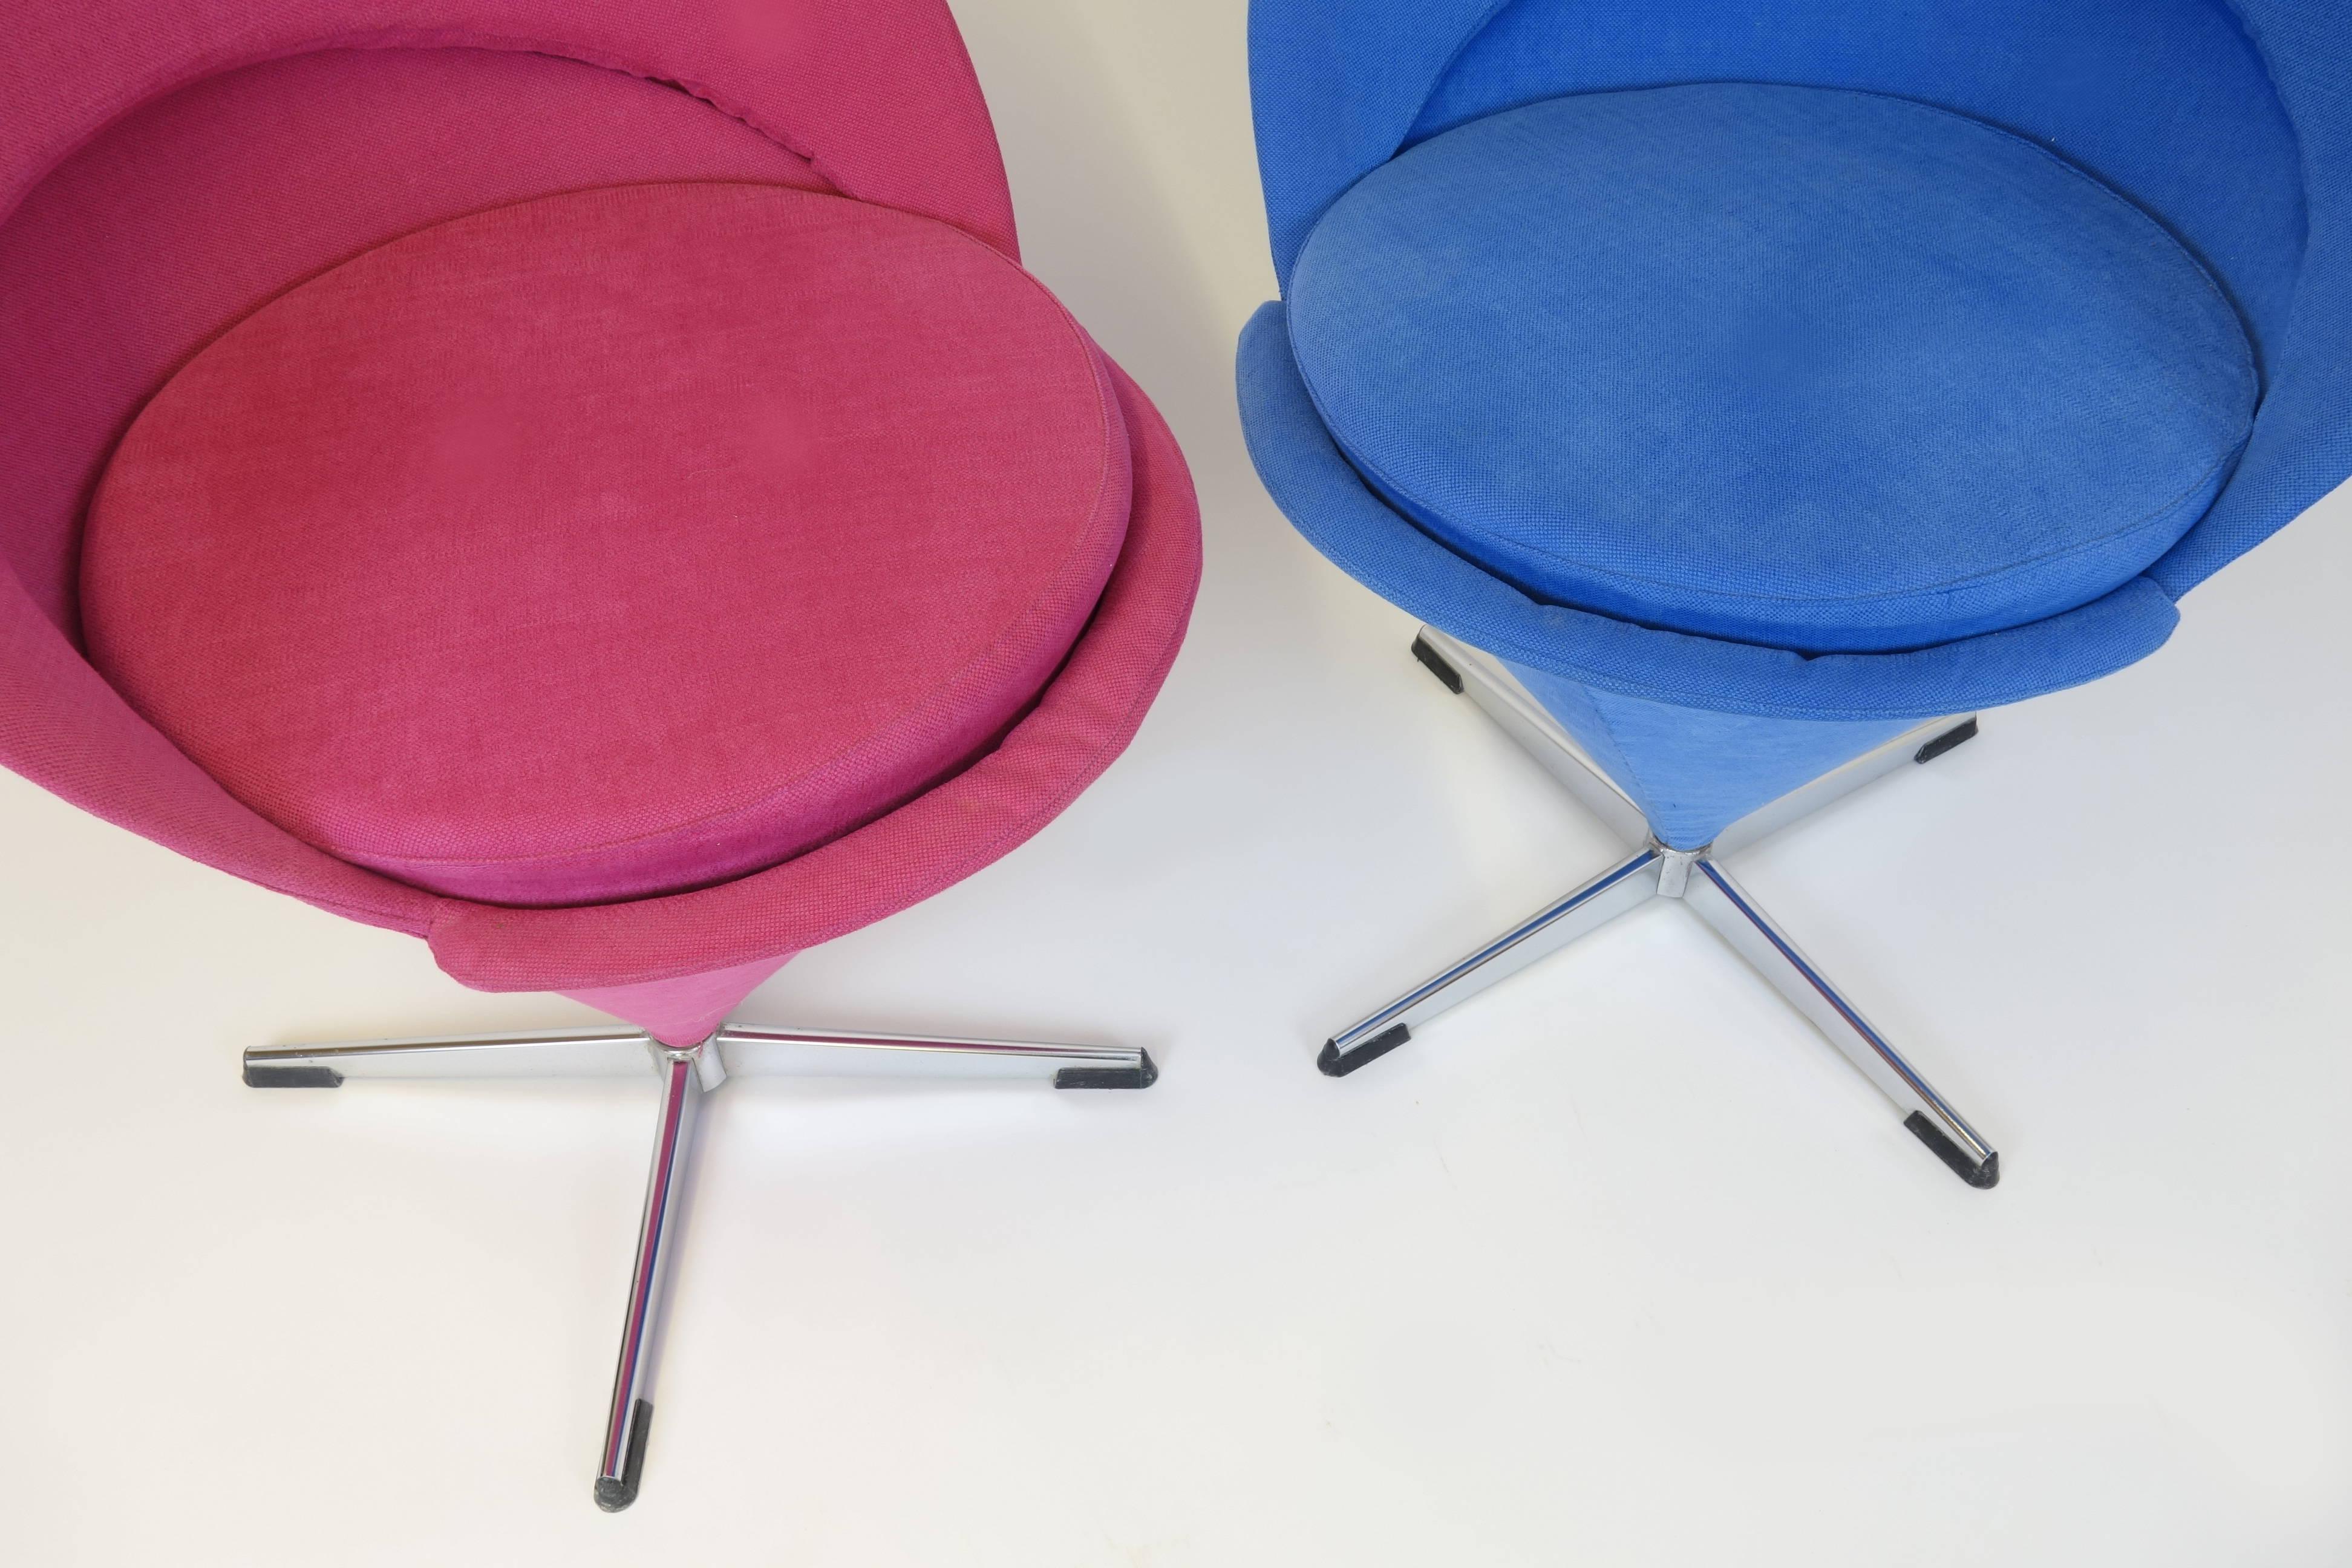 Original K1 cone chairs design blue red by Verner Panton, Denmark 1950s. They are wearing its original woven fabric in very good and comfortable original condition. The chairs are based on a rotating steel cross. Its black cover shoes refer to its